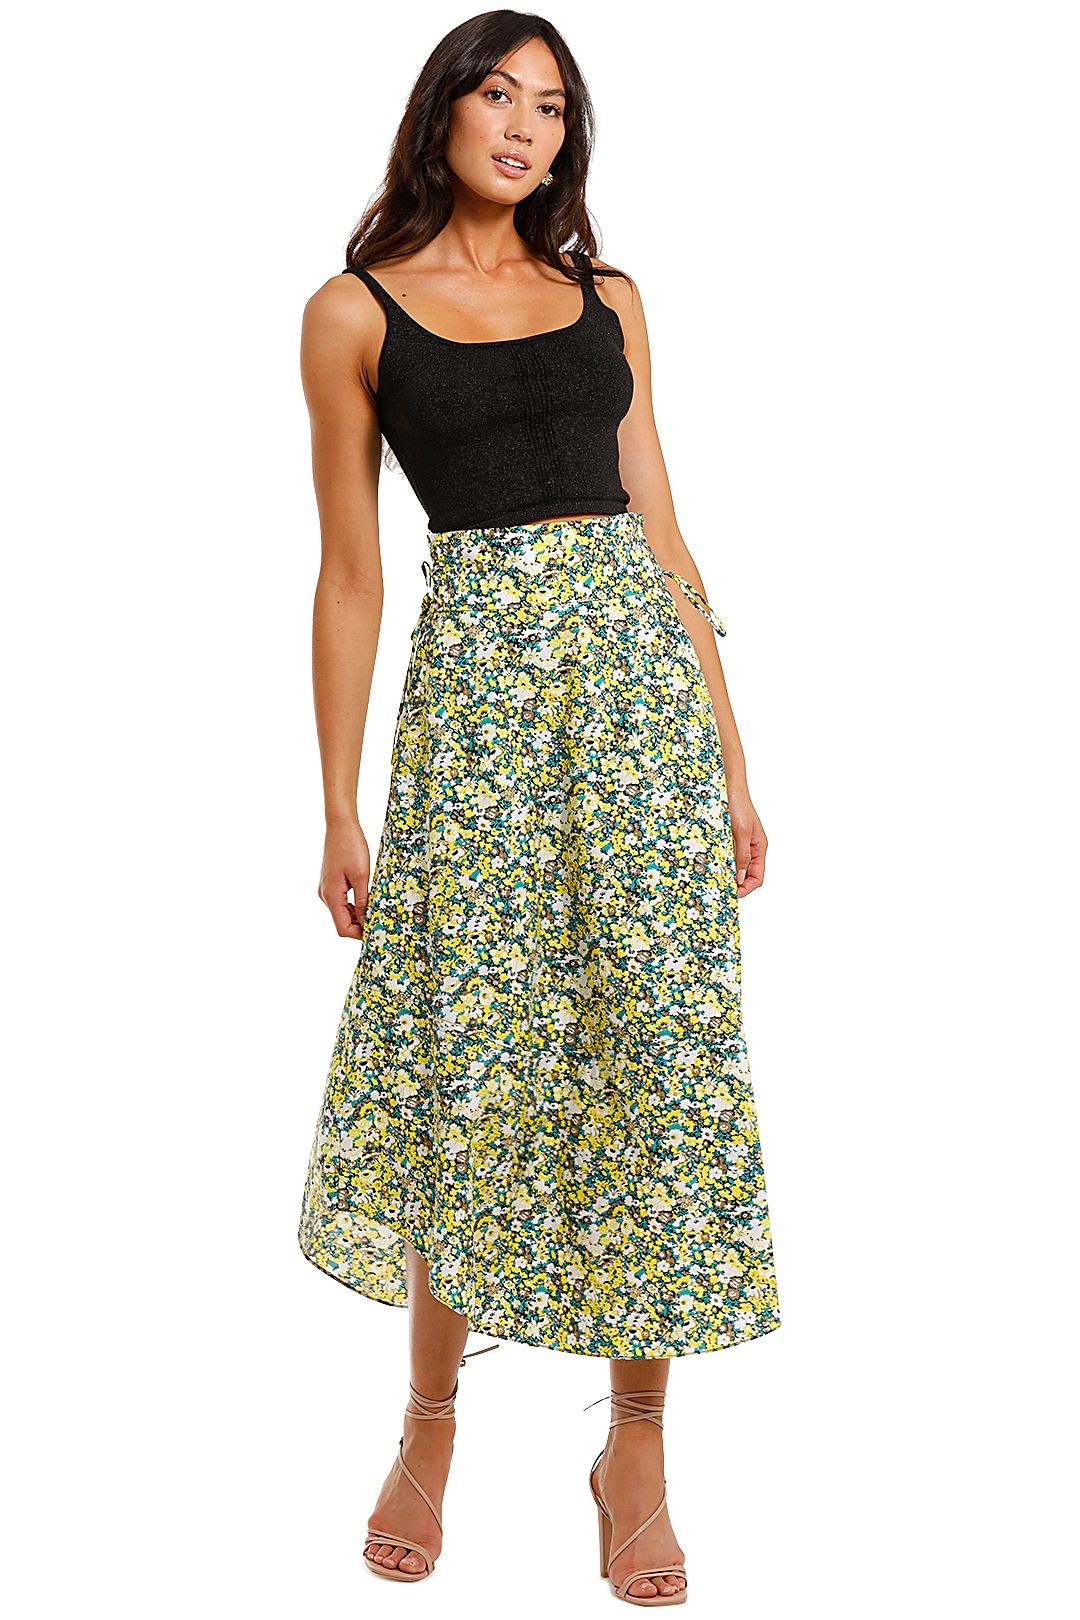 C&M Camilla And Marc Ditzy Print Skirt